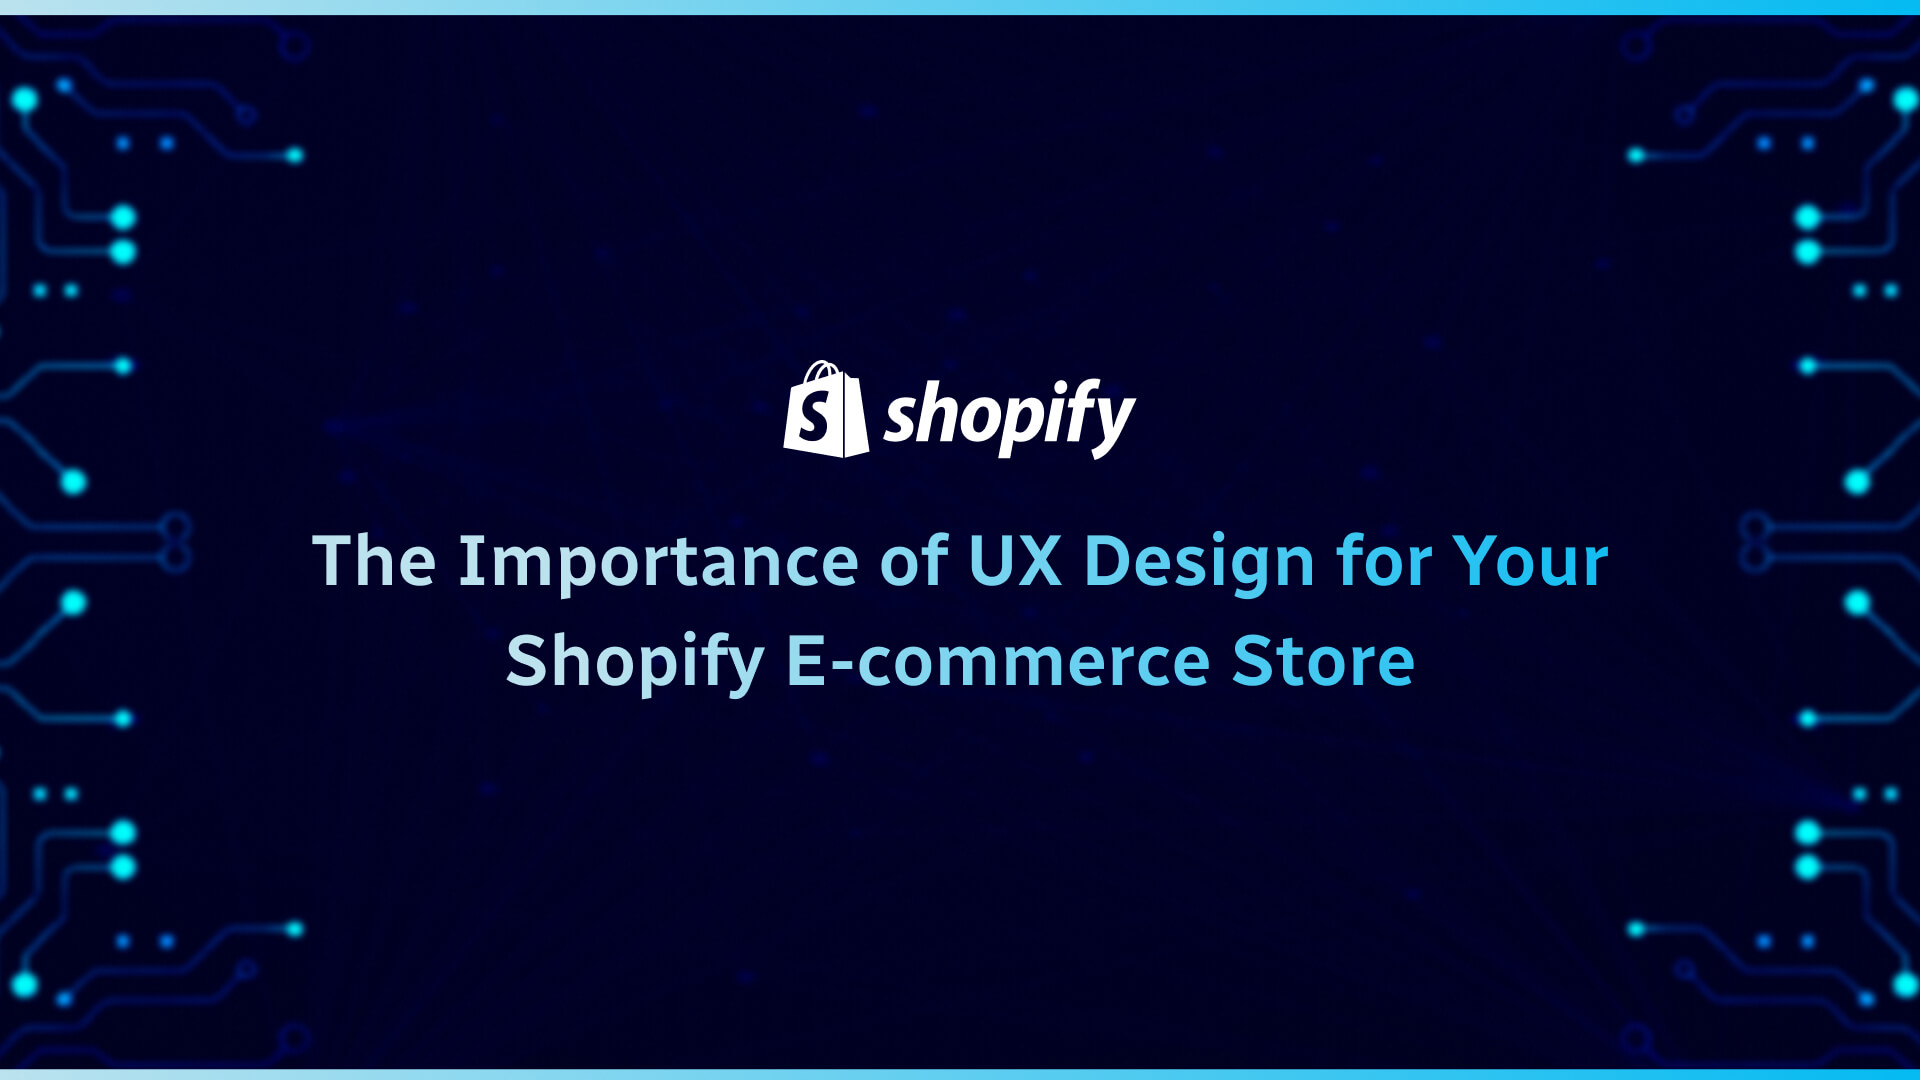 The Importance of UX Design for Your Shopify E-commerce Store